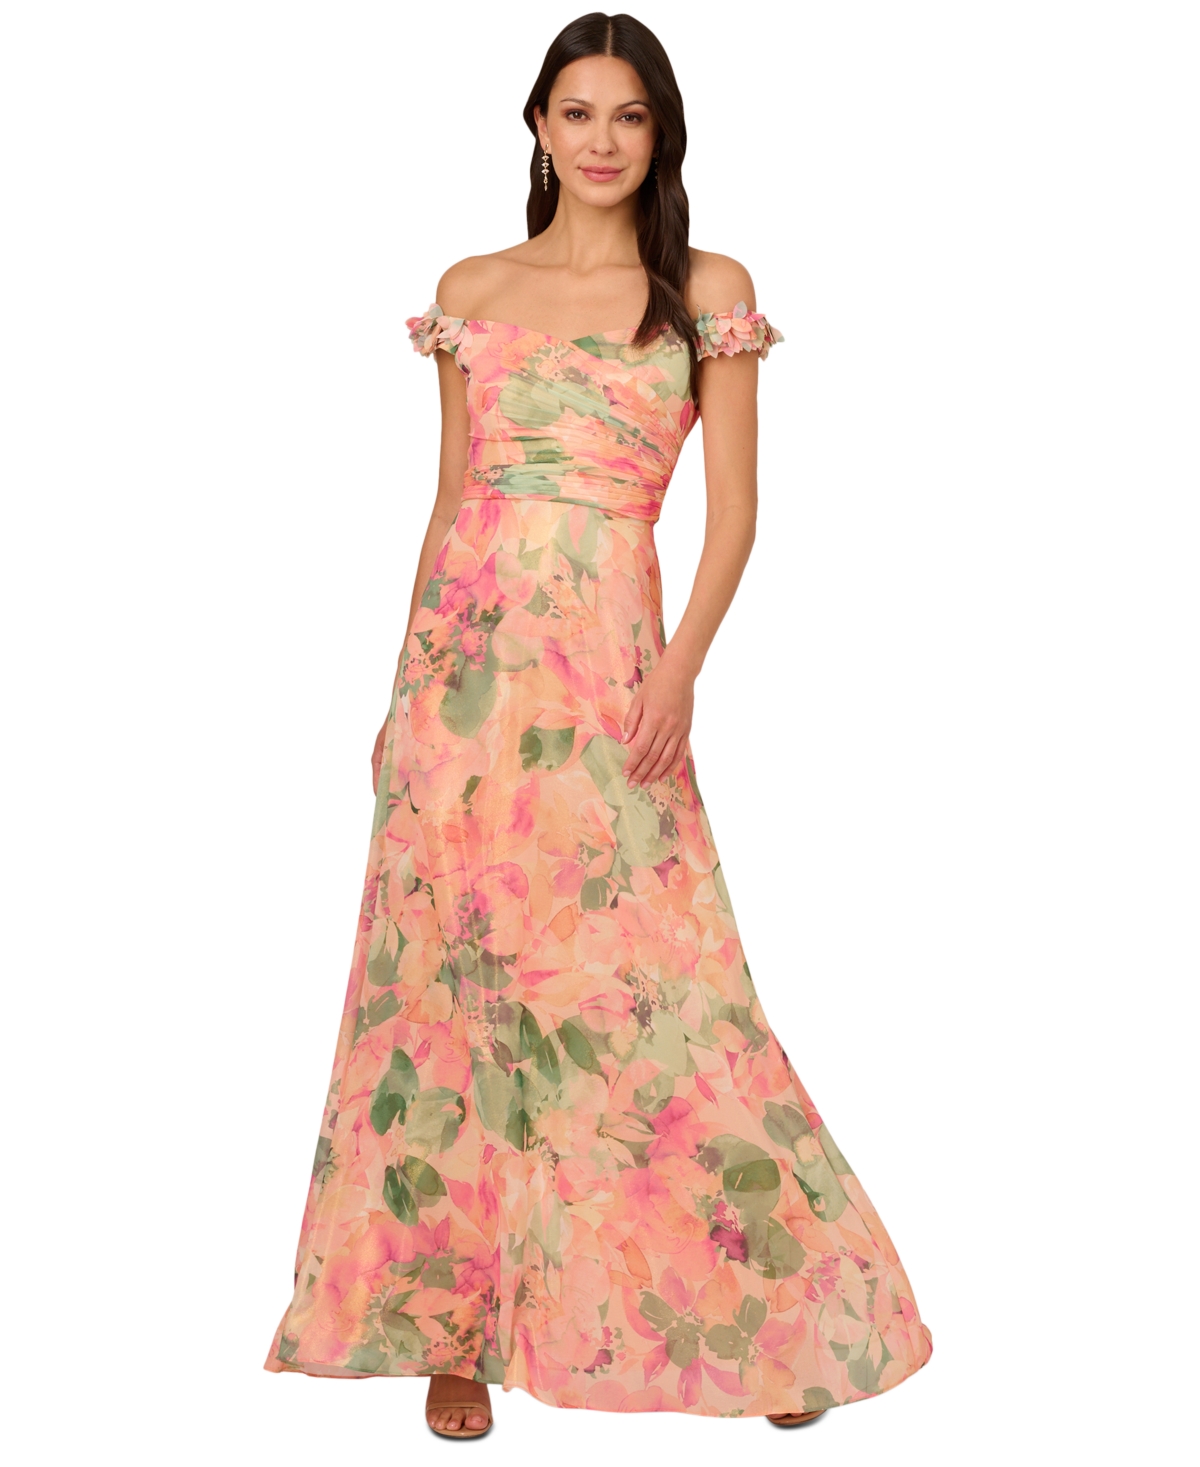 Women's Printed Off-The-Shoulder Chiffon Gown - Blush Multi